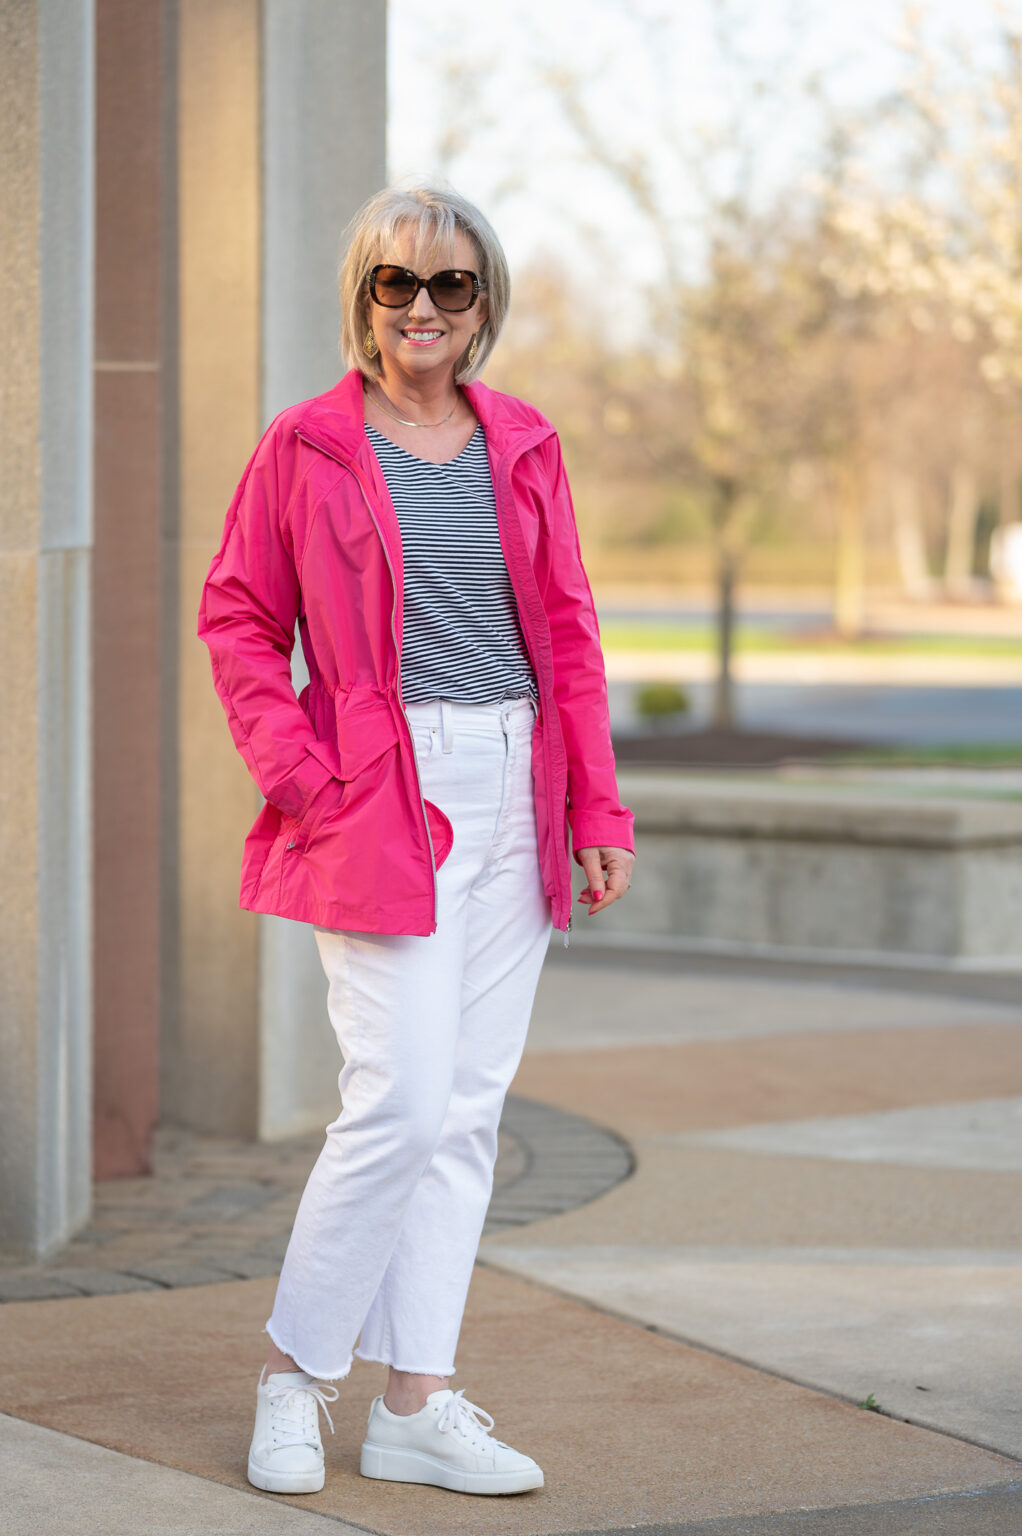 Add Versatility to Your Spring Wardrobe - Dressed for My Day